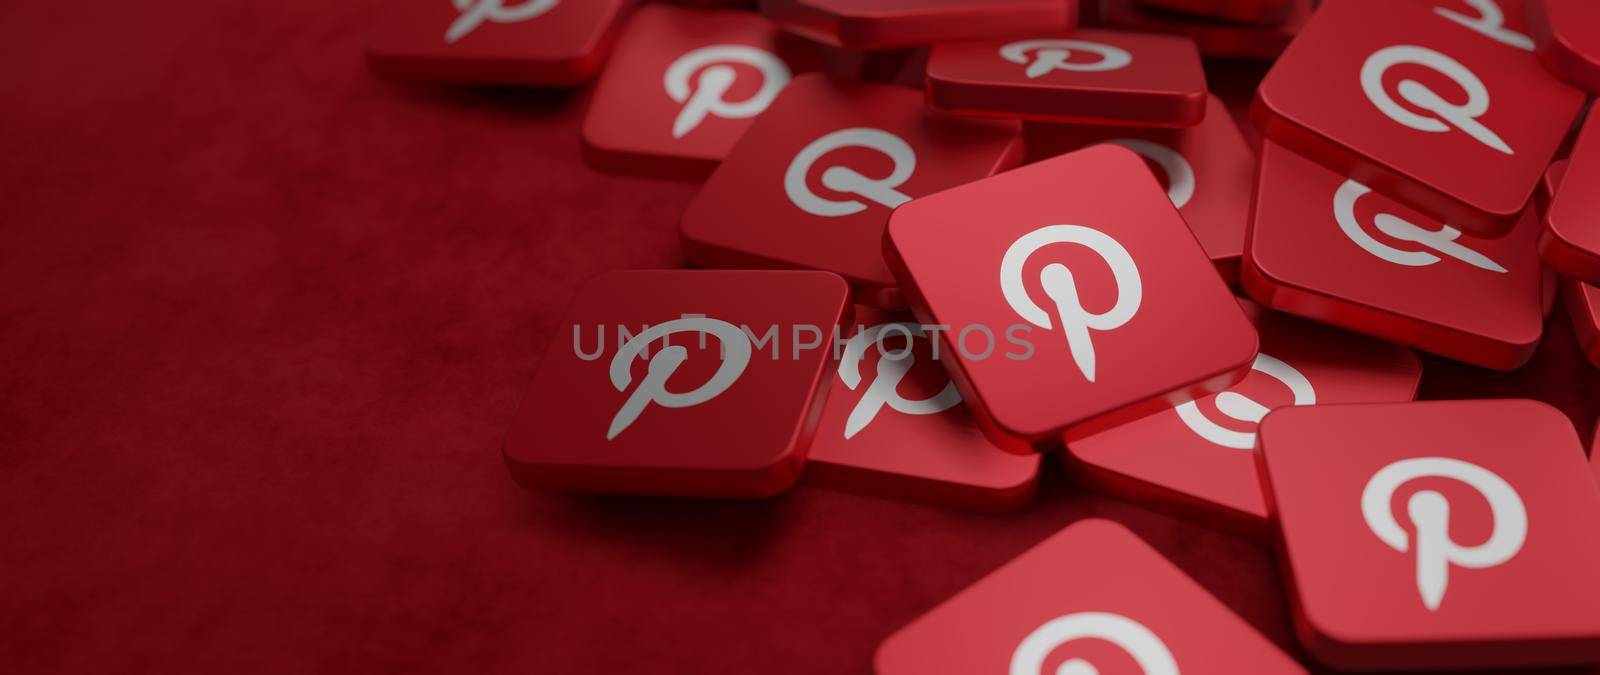 Pinterest logo concept banner scattered tiles with copyspace 3D Illustration by yay_lmrb